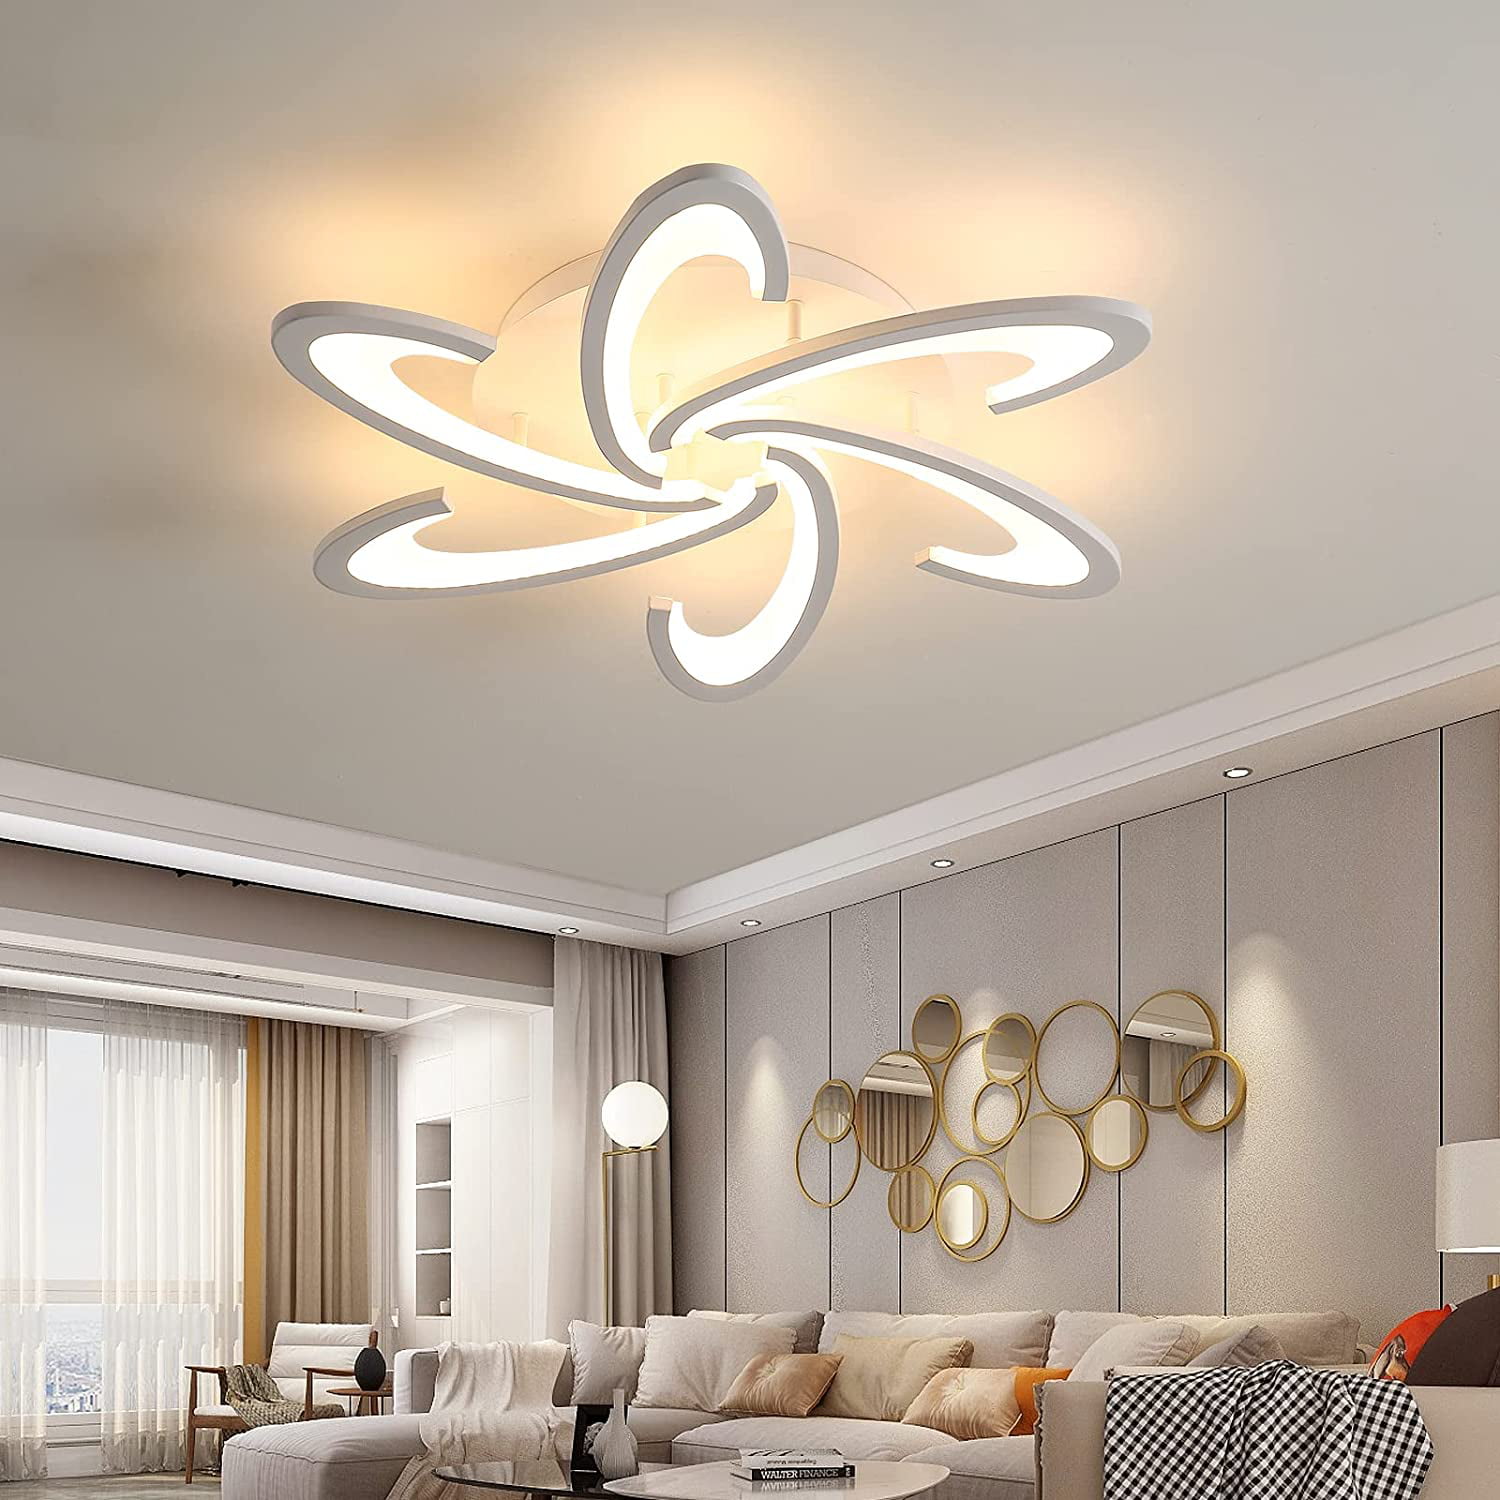 Acrylic Fish Ceiling Fixtures Dinging Room Pendant Lamp Dimmer Light Chandeliers 